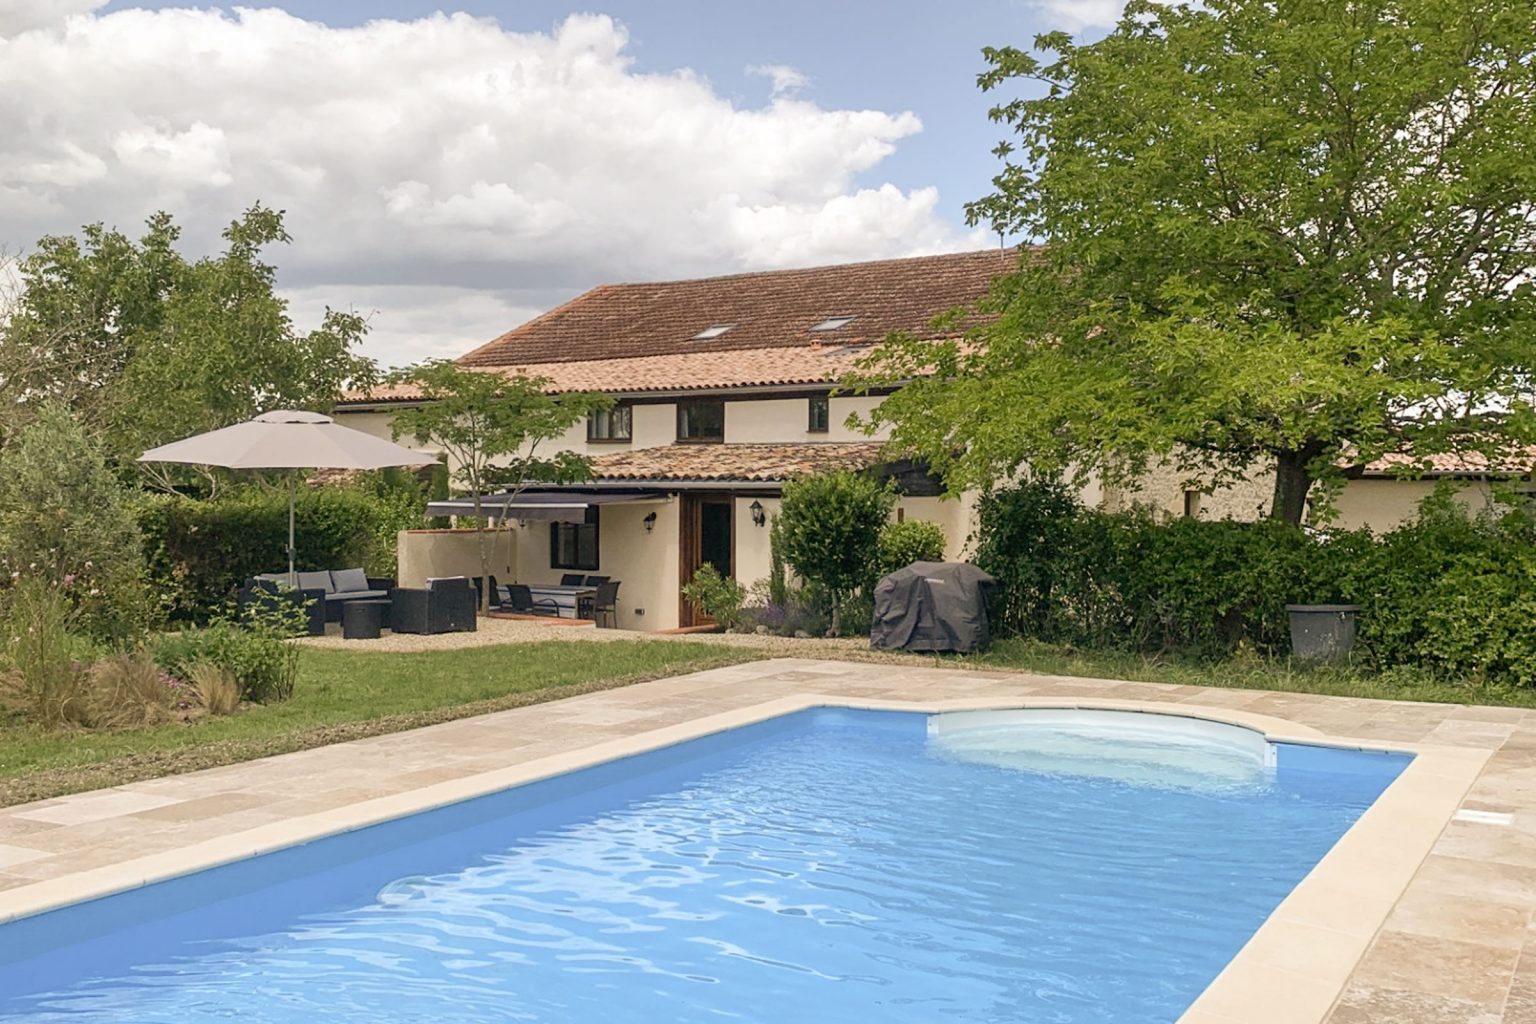 Les Oliviers holiday gite in SW France